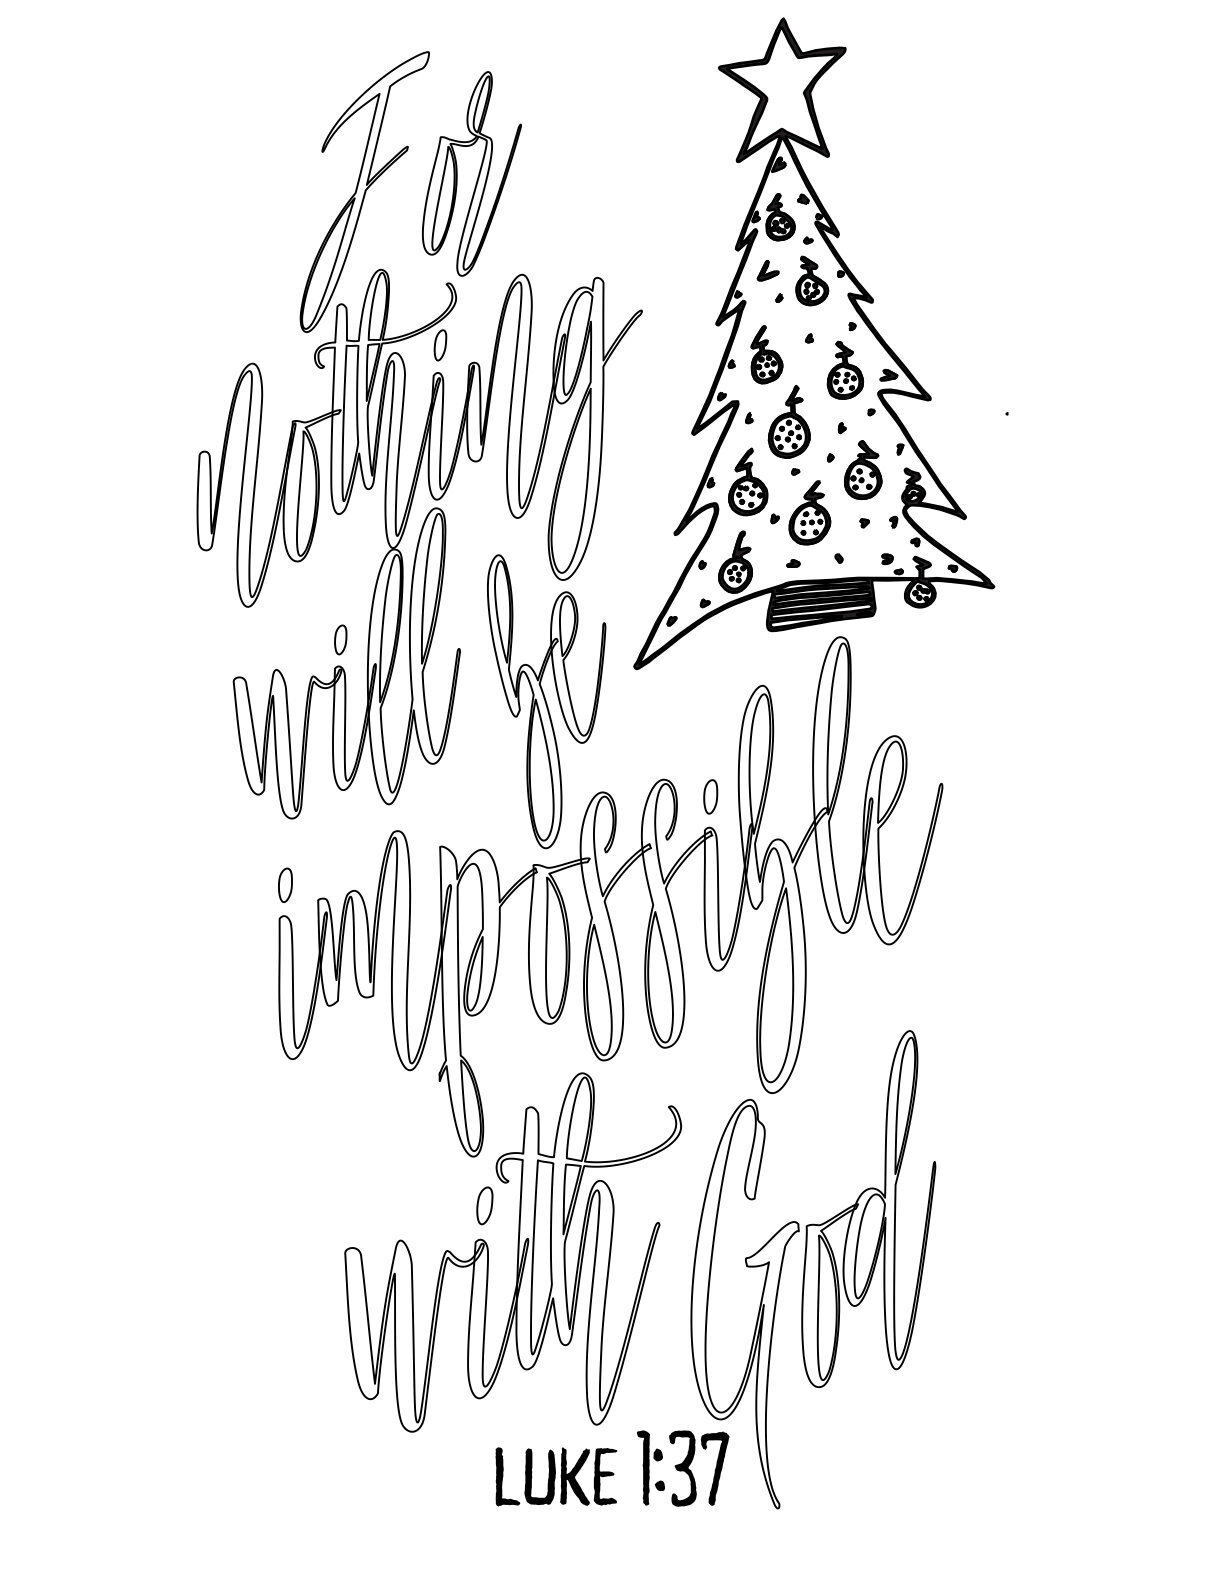 Free Advent Coloring Page - For Nothing Will Be Impossible With God - Luke 1:37 - Printable Christmas Doodles CLICK HERE TO DOWNLOAD YOUR FREE NOTHING WILL BE IMPOSSIBLE ADVENT PRINTABLE